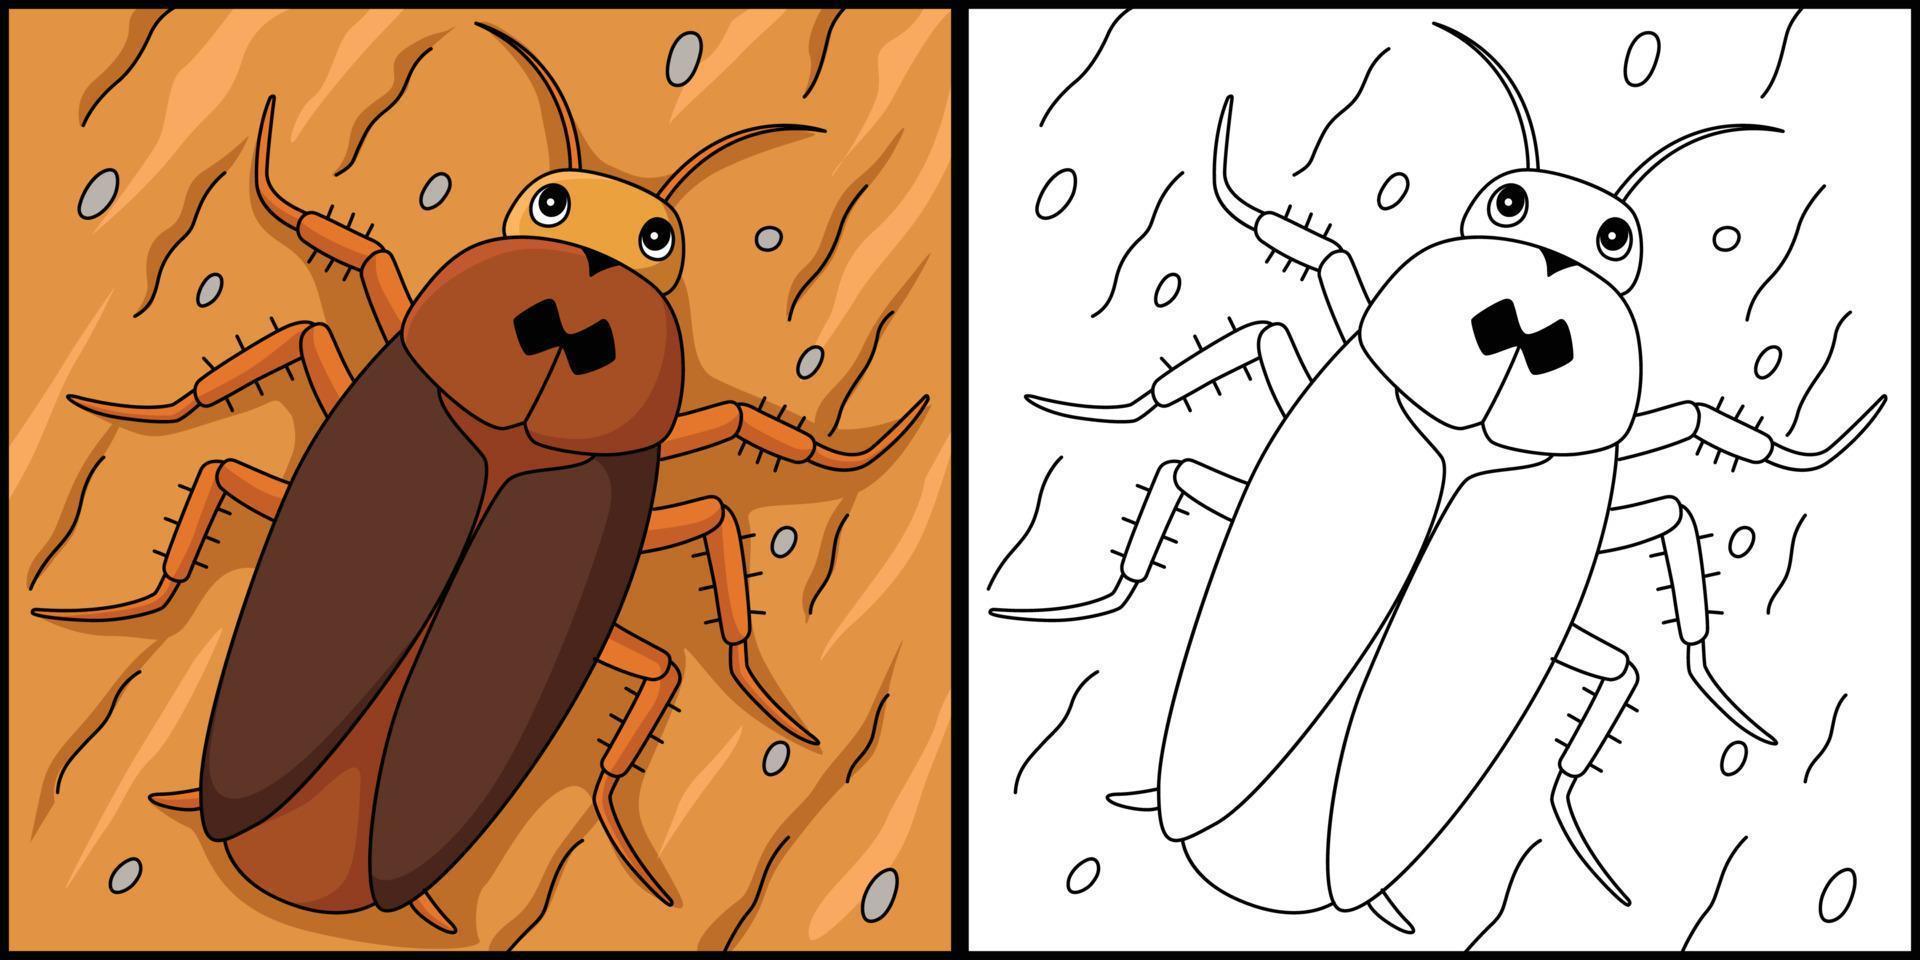 Cockroach Animal Coloring Page Illustration vector